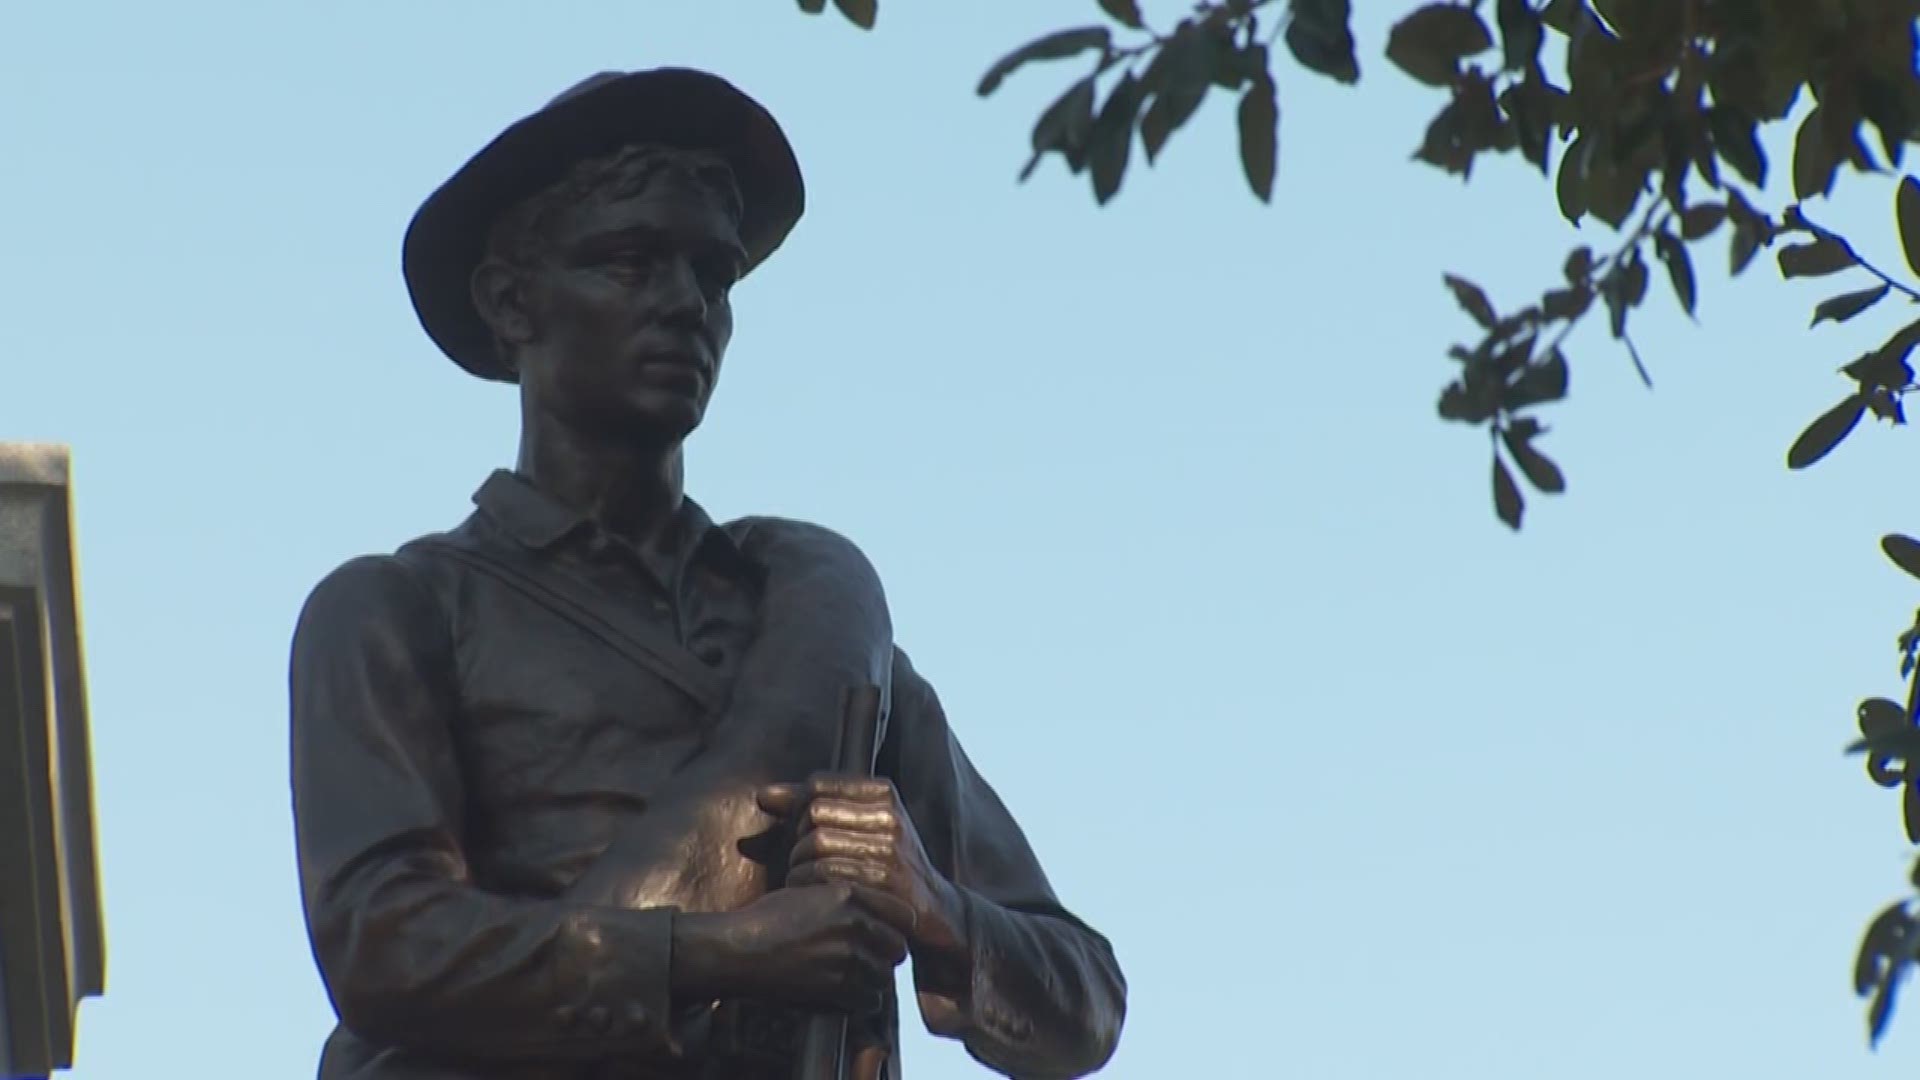 There are dozens of Confederate-based schools, streets and statues remaining in Central Texas, and the discussion to change some is already underway.